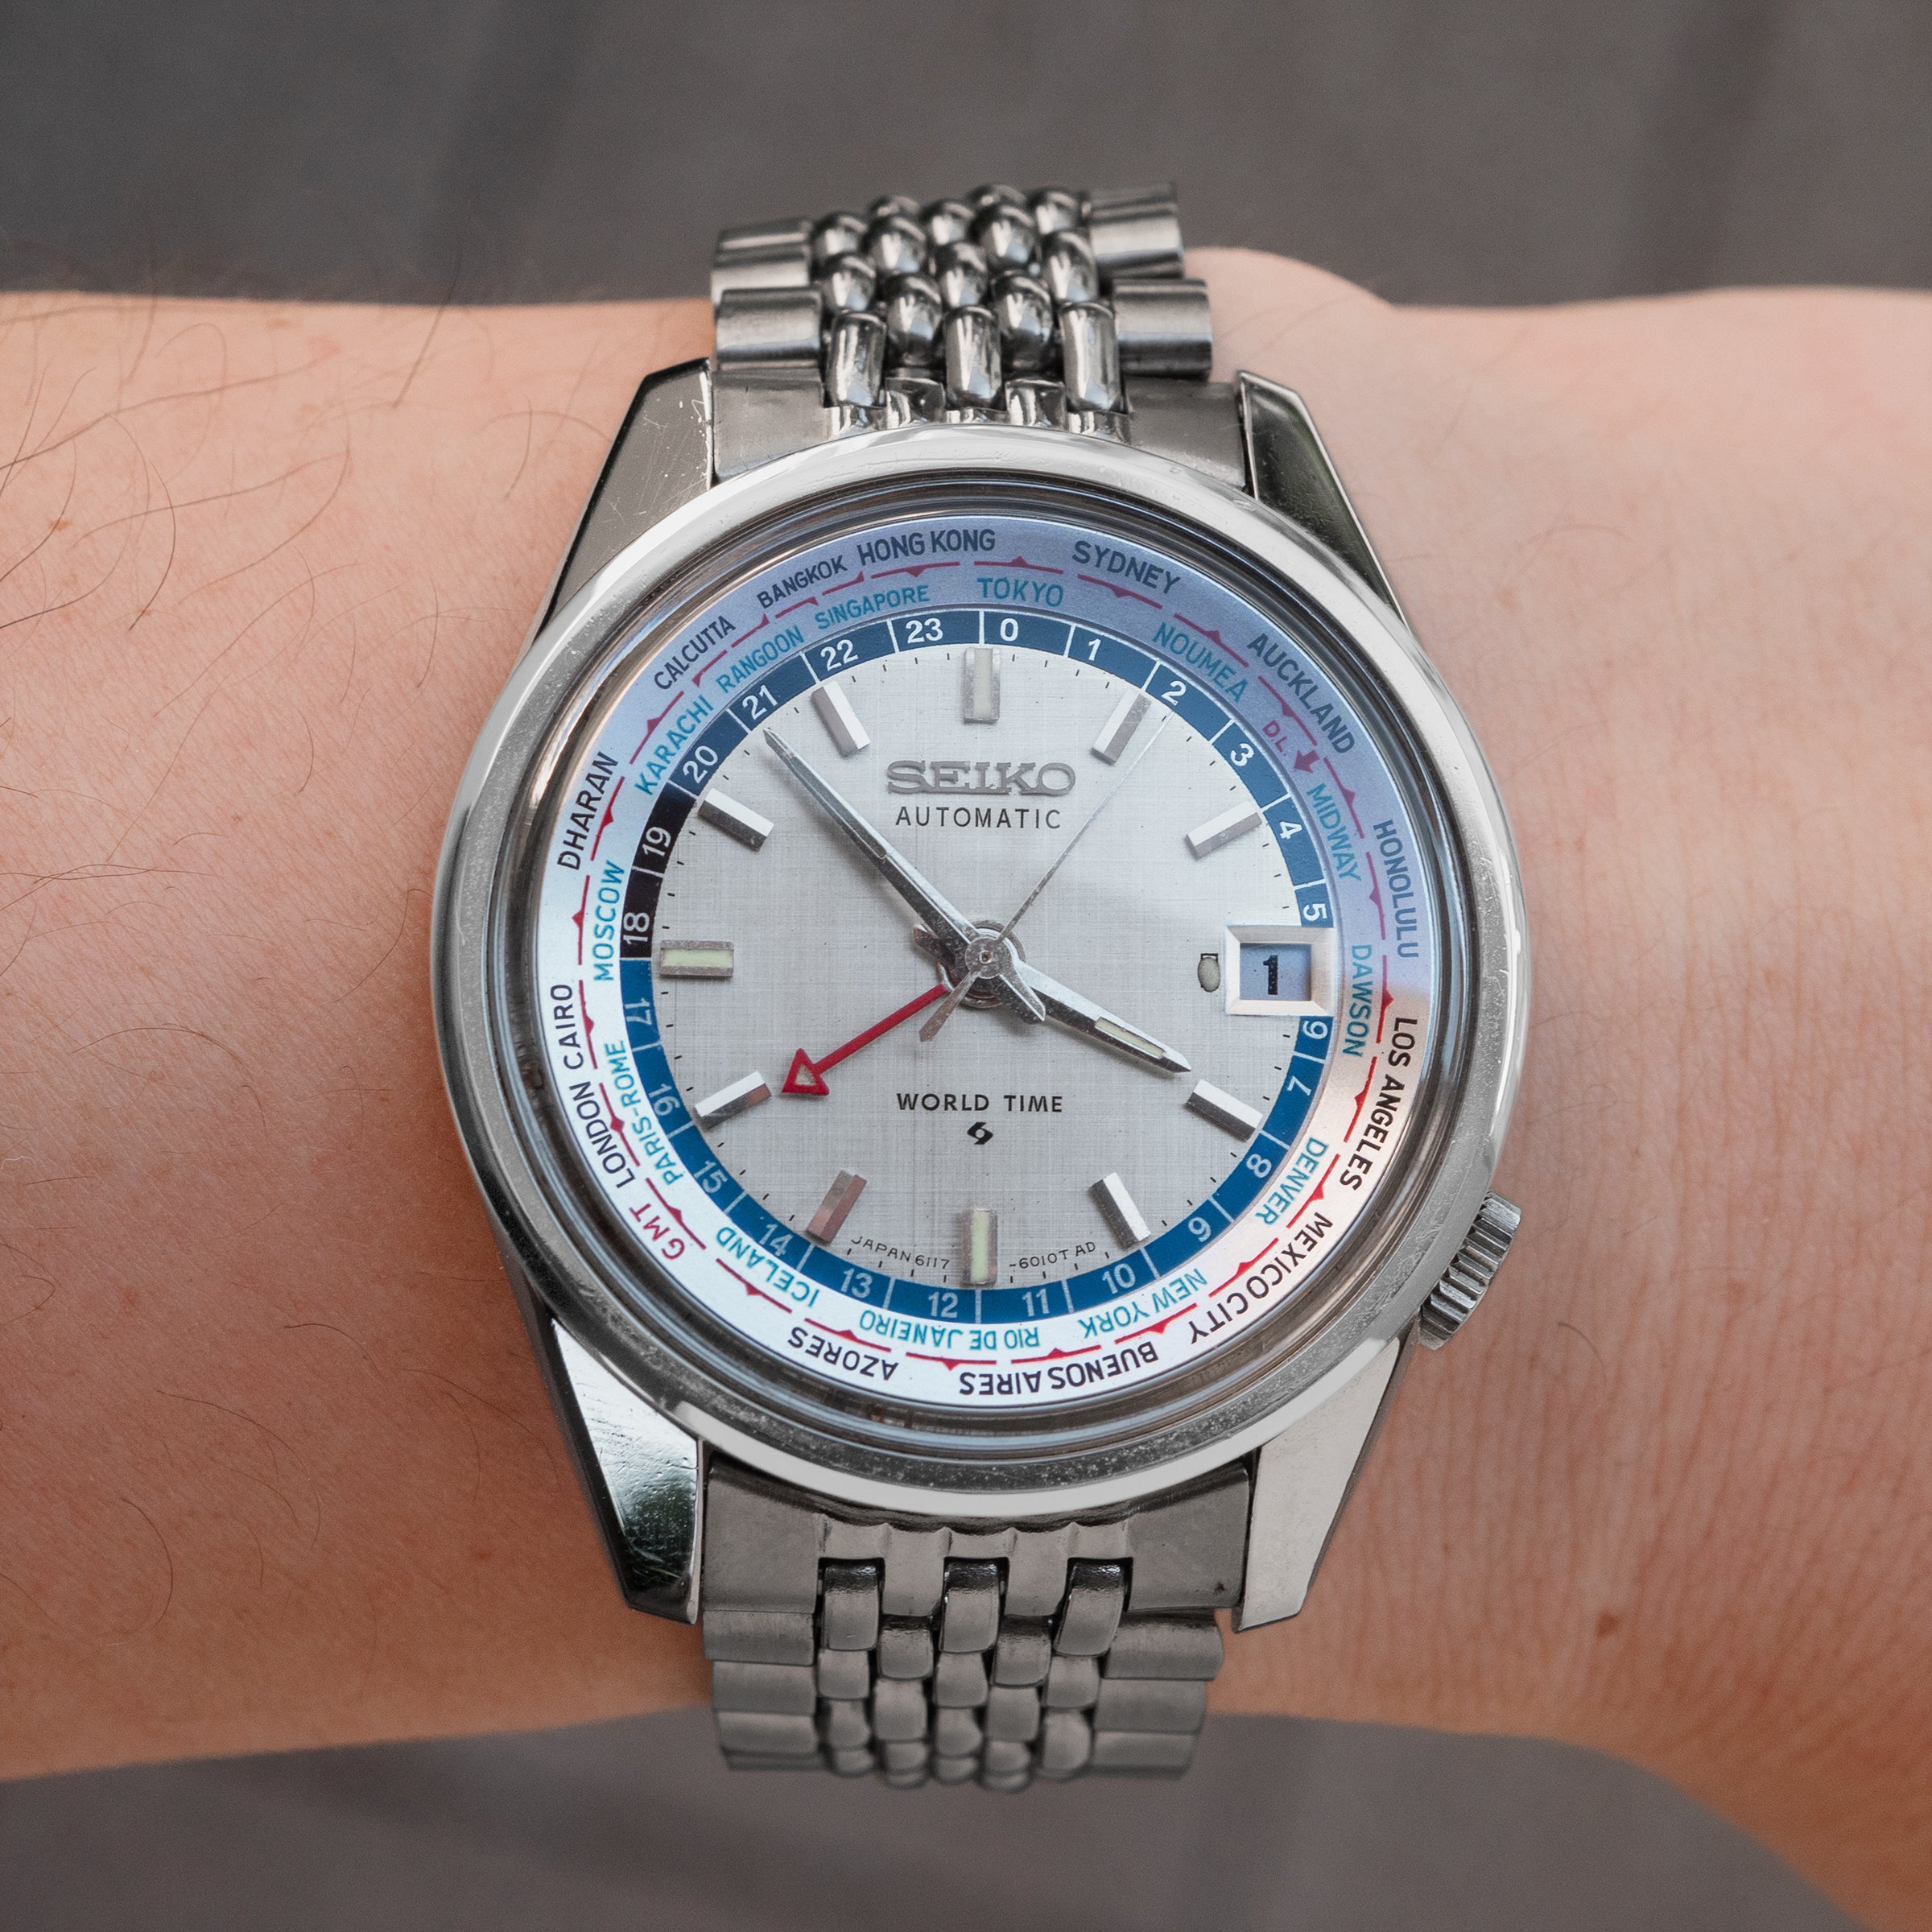 No. 379 / Seiko World Time (3rd model) - 1969 – From Time To Times